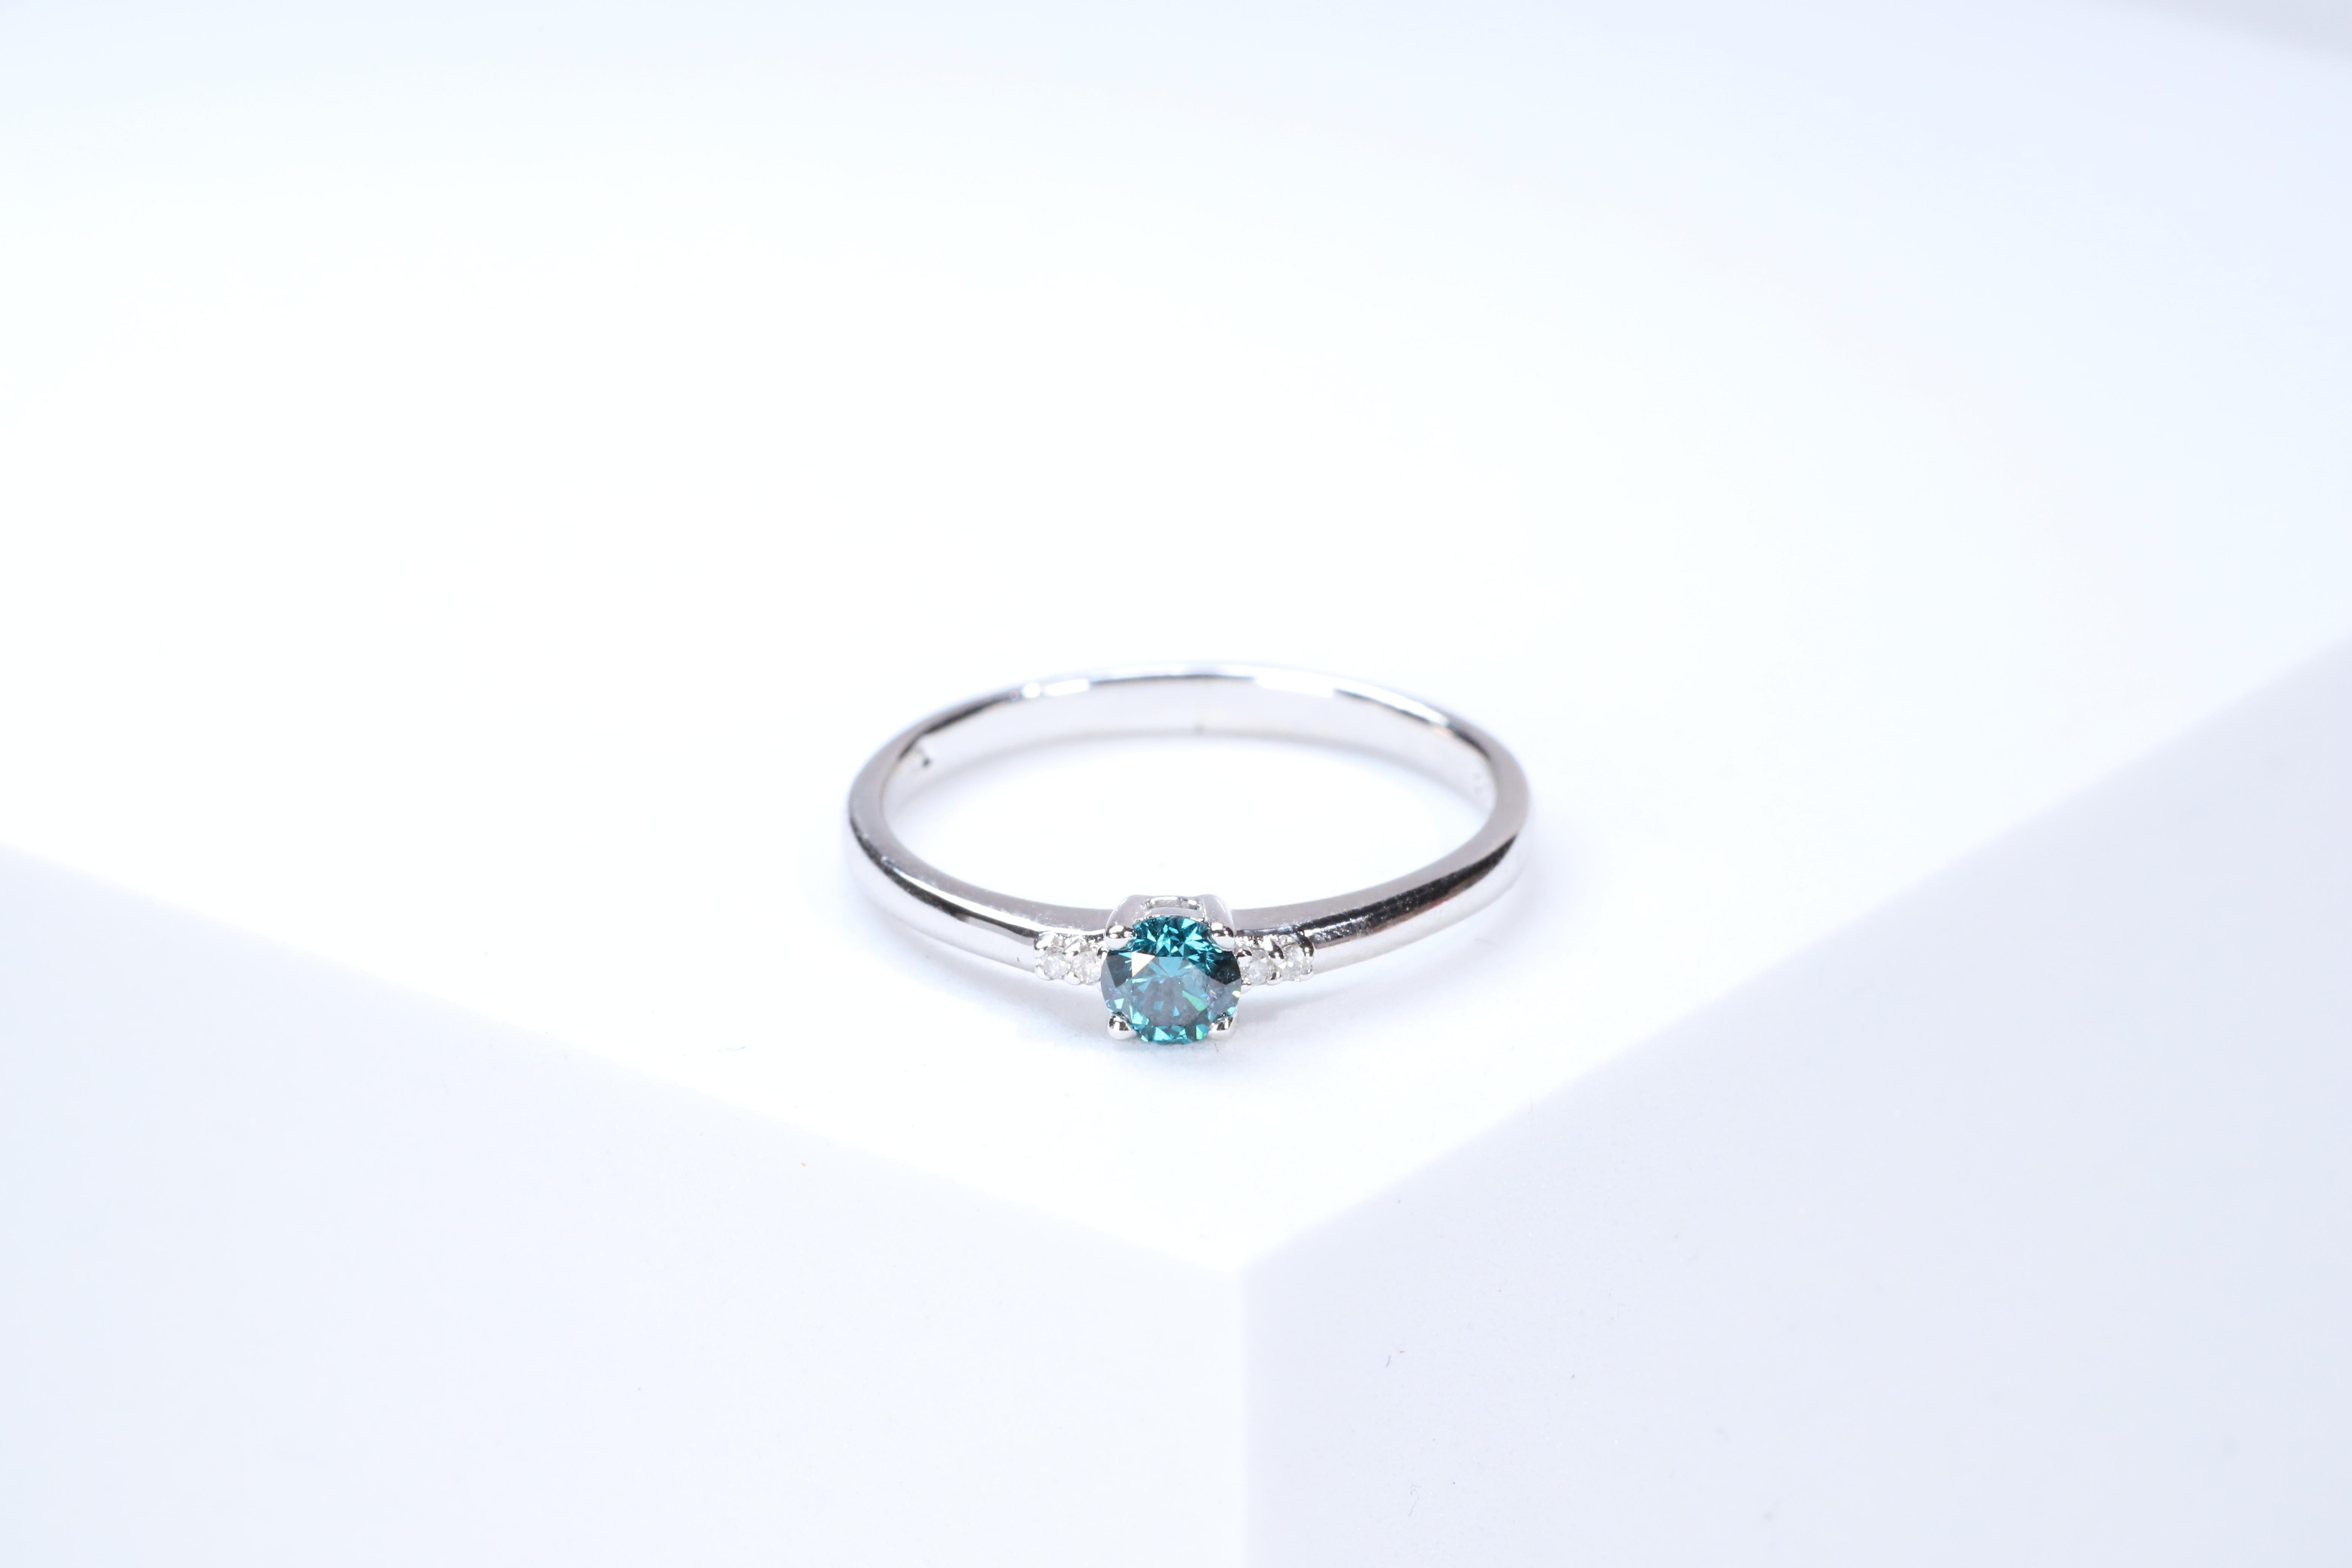 Stunning, timeless and classy eternity Unique Ring. Decorate yourself in luxury with this Gin & Grace Ring. The 925 Sterling Silver jewelry boasts with Natural Round-cut white Diamond (4 Pcs) 0.02 Carat, Round-cut Blue Diamond (1 pcs) 0.27 carat